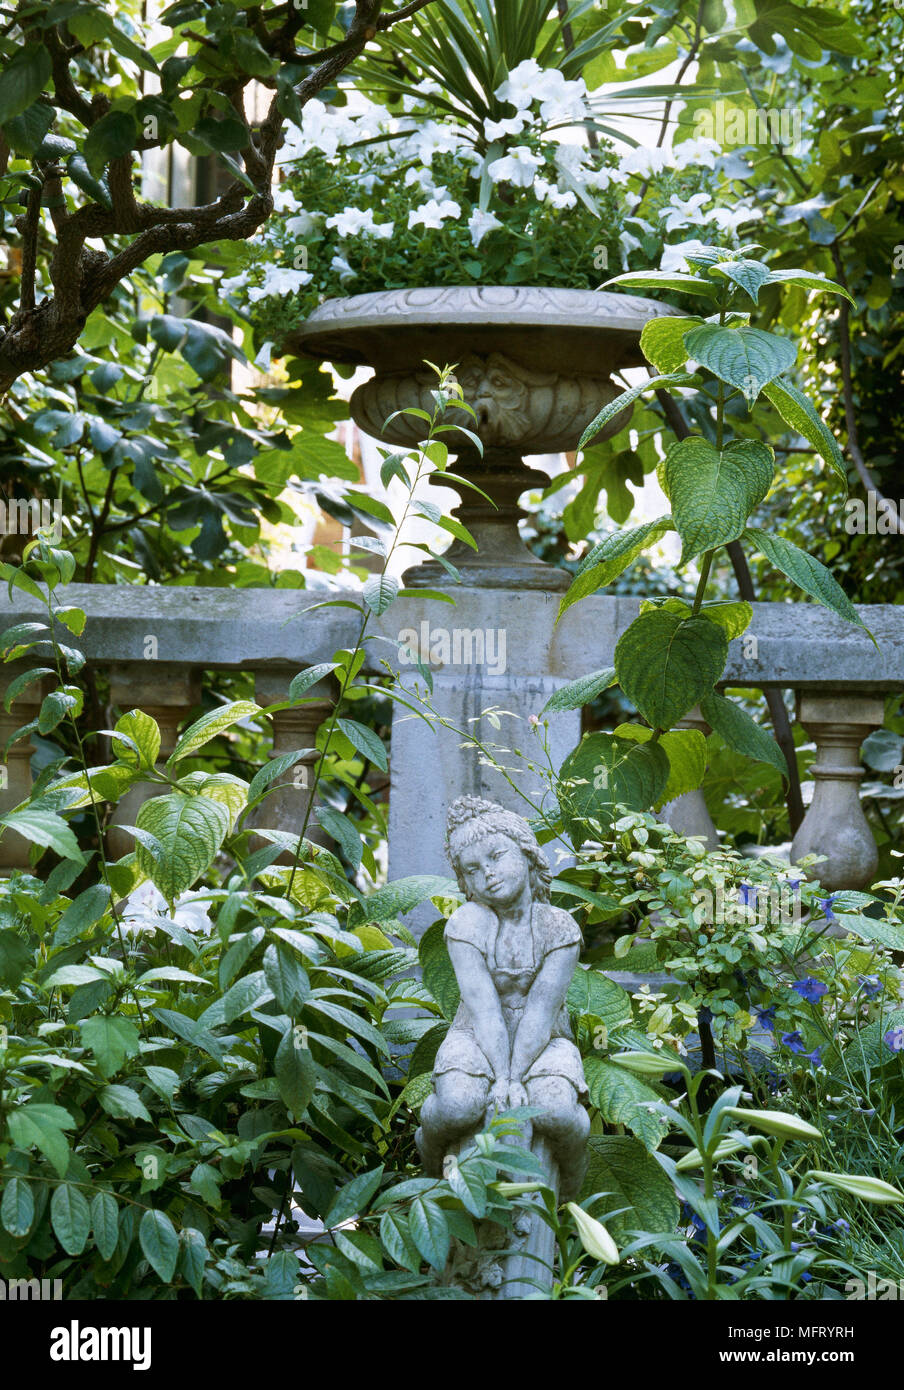 Stone urn planter on stone wall small statue of girl set amongst shrubs; planters statuettes figures focal points foliage Stock Photo